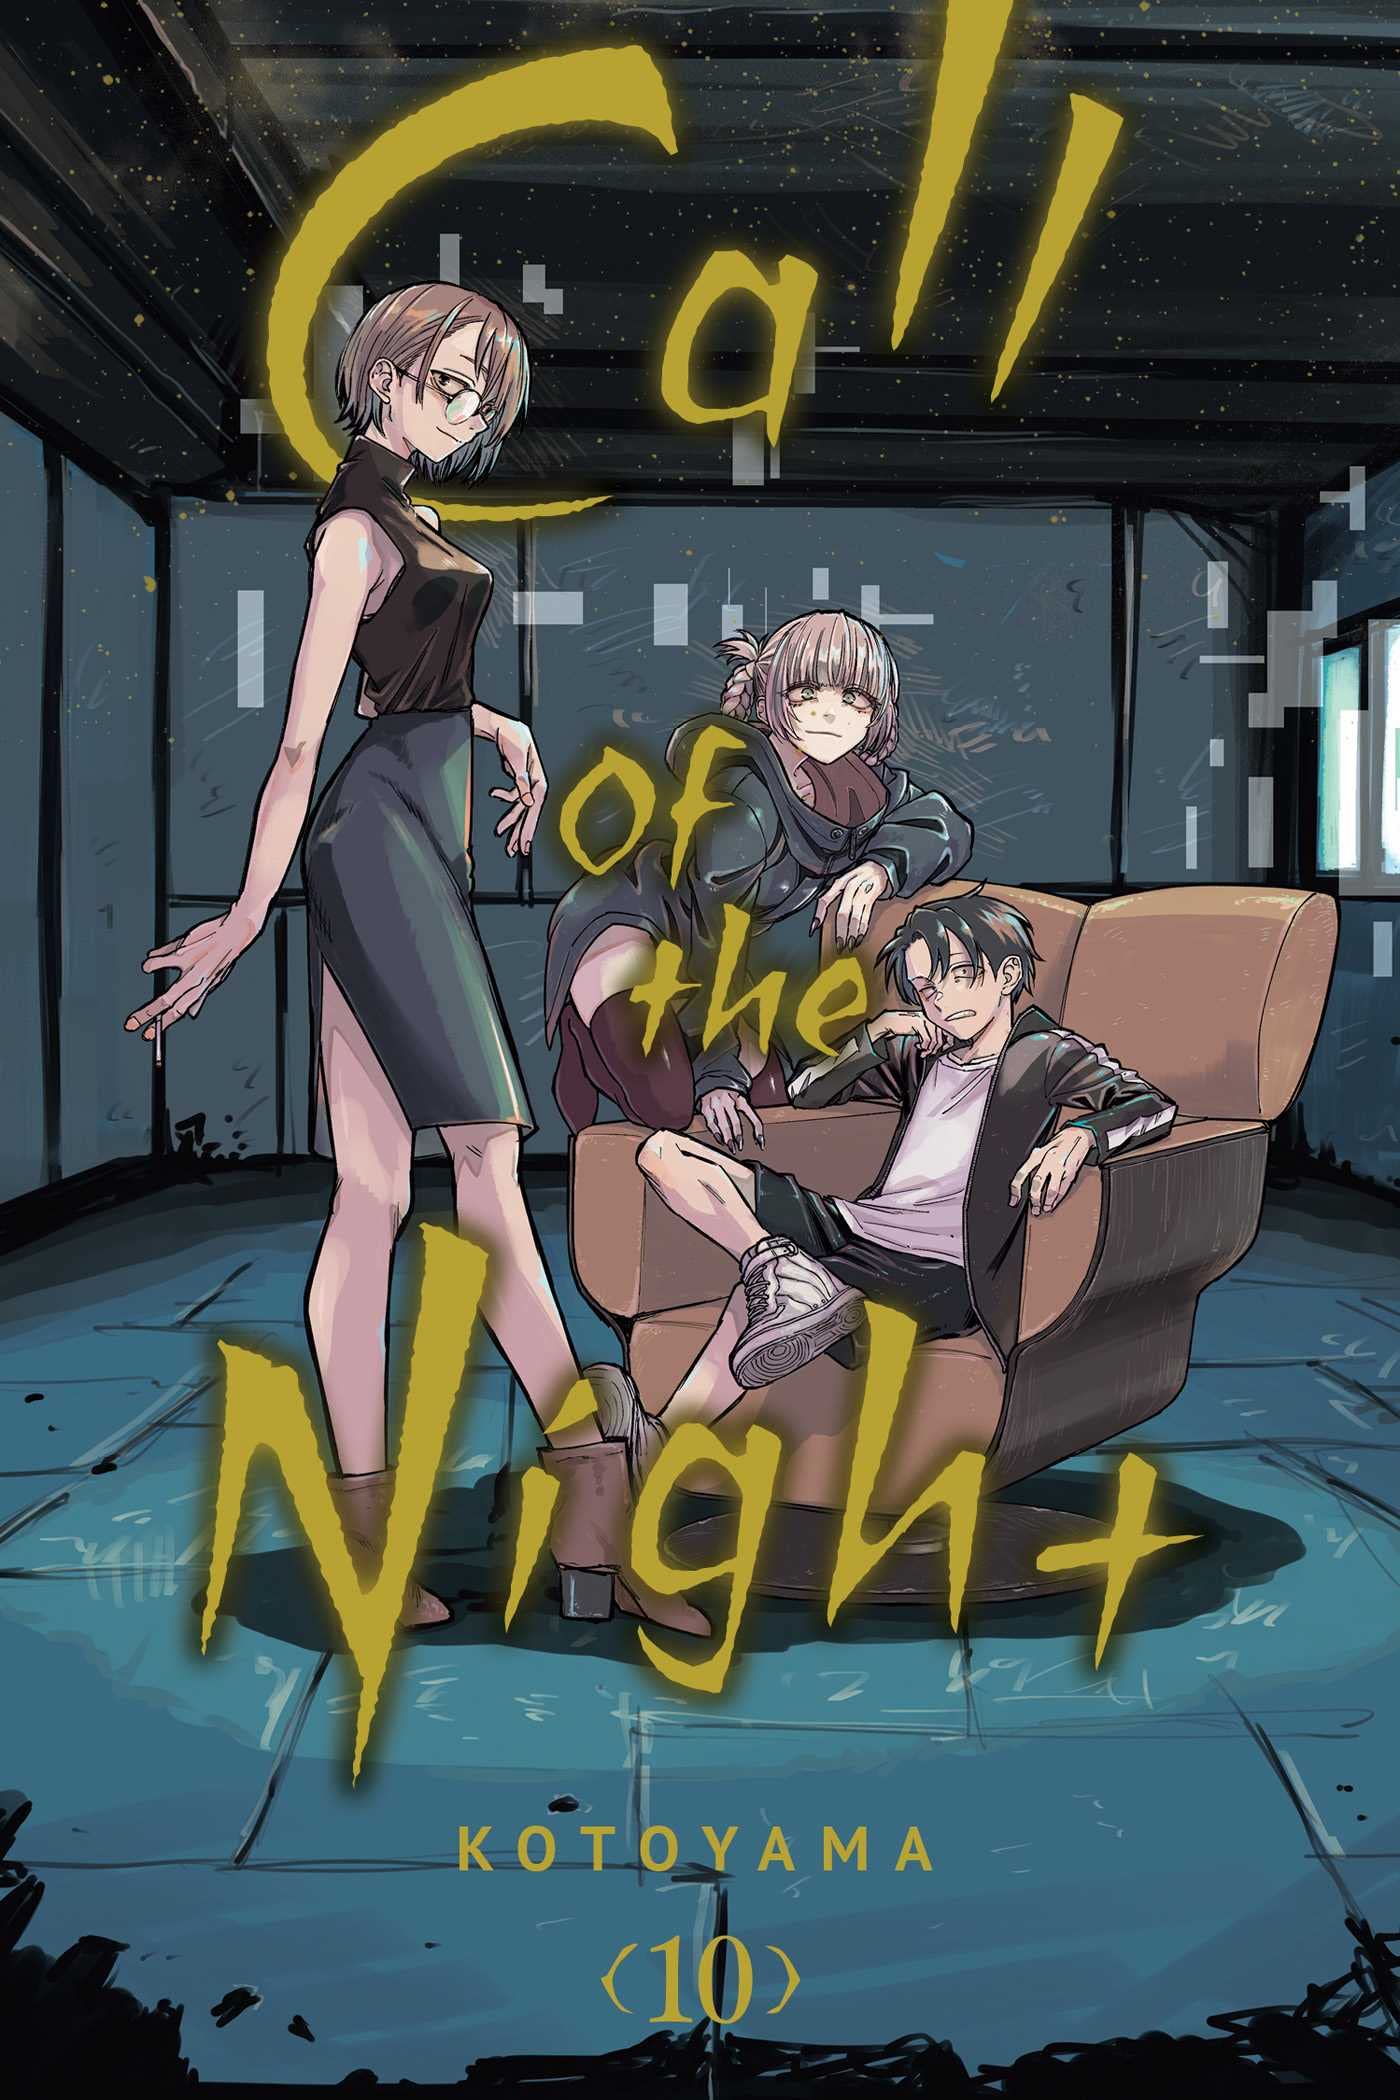 Call of the Night Vol. 10